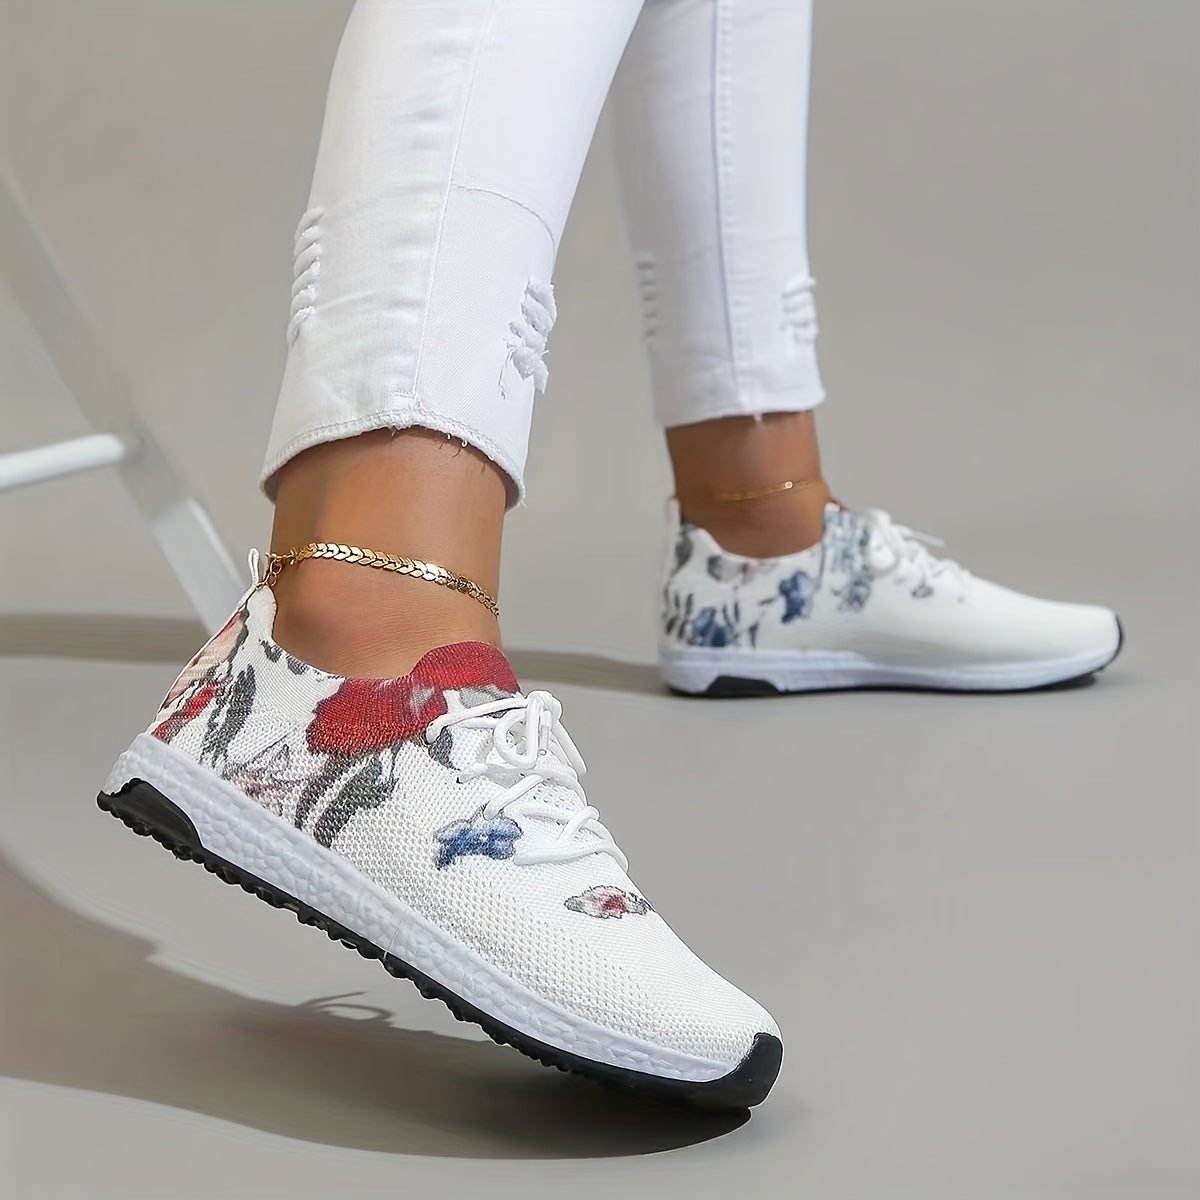 「lovevop」Women's Floral Print Sneakers, Lightweight Low Top Lace Up Shoes, Women's Breathable Knit Shoes